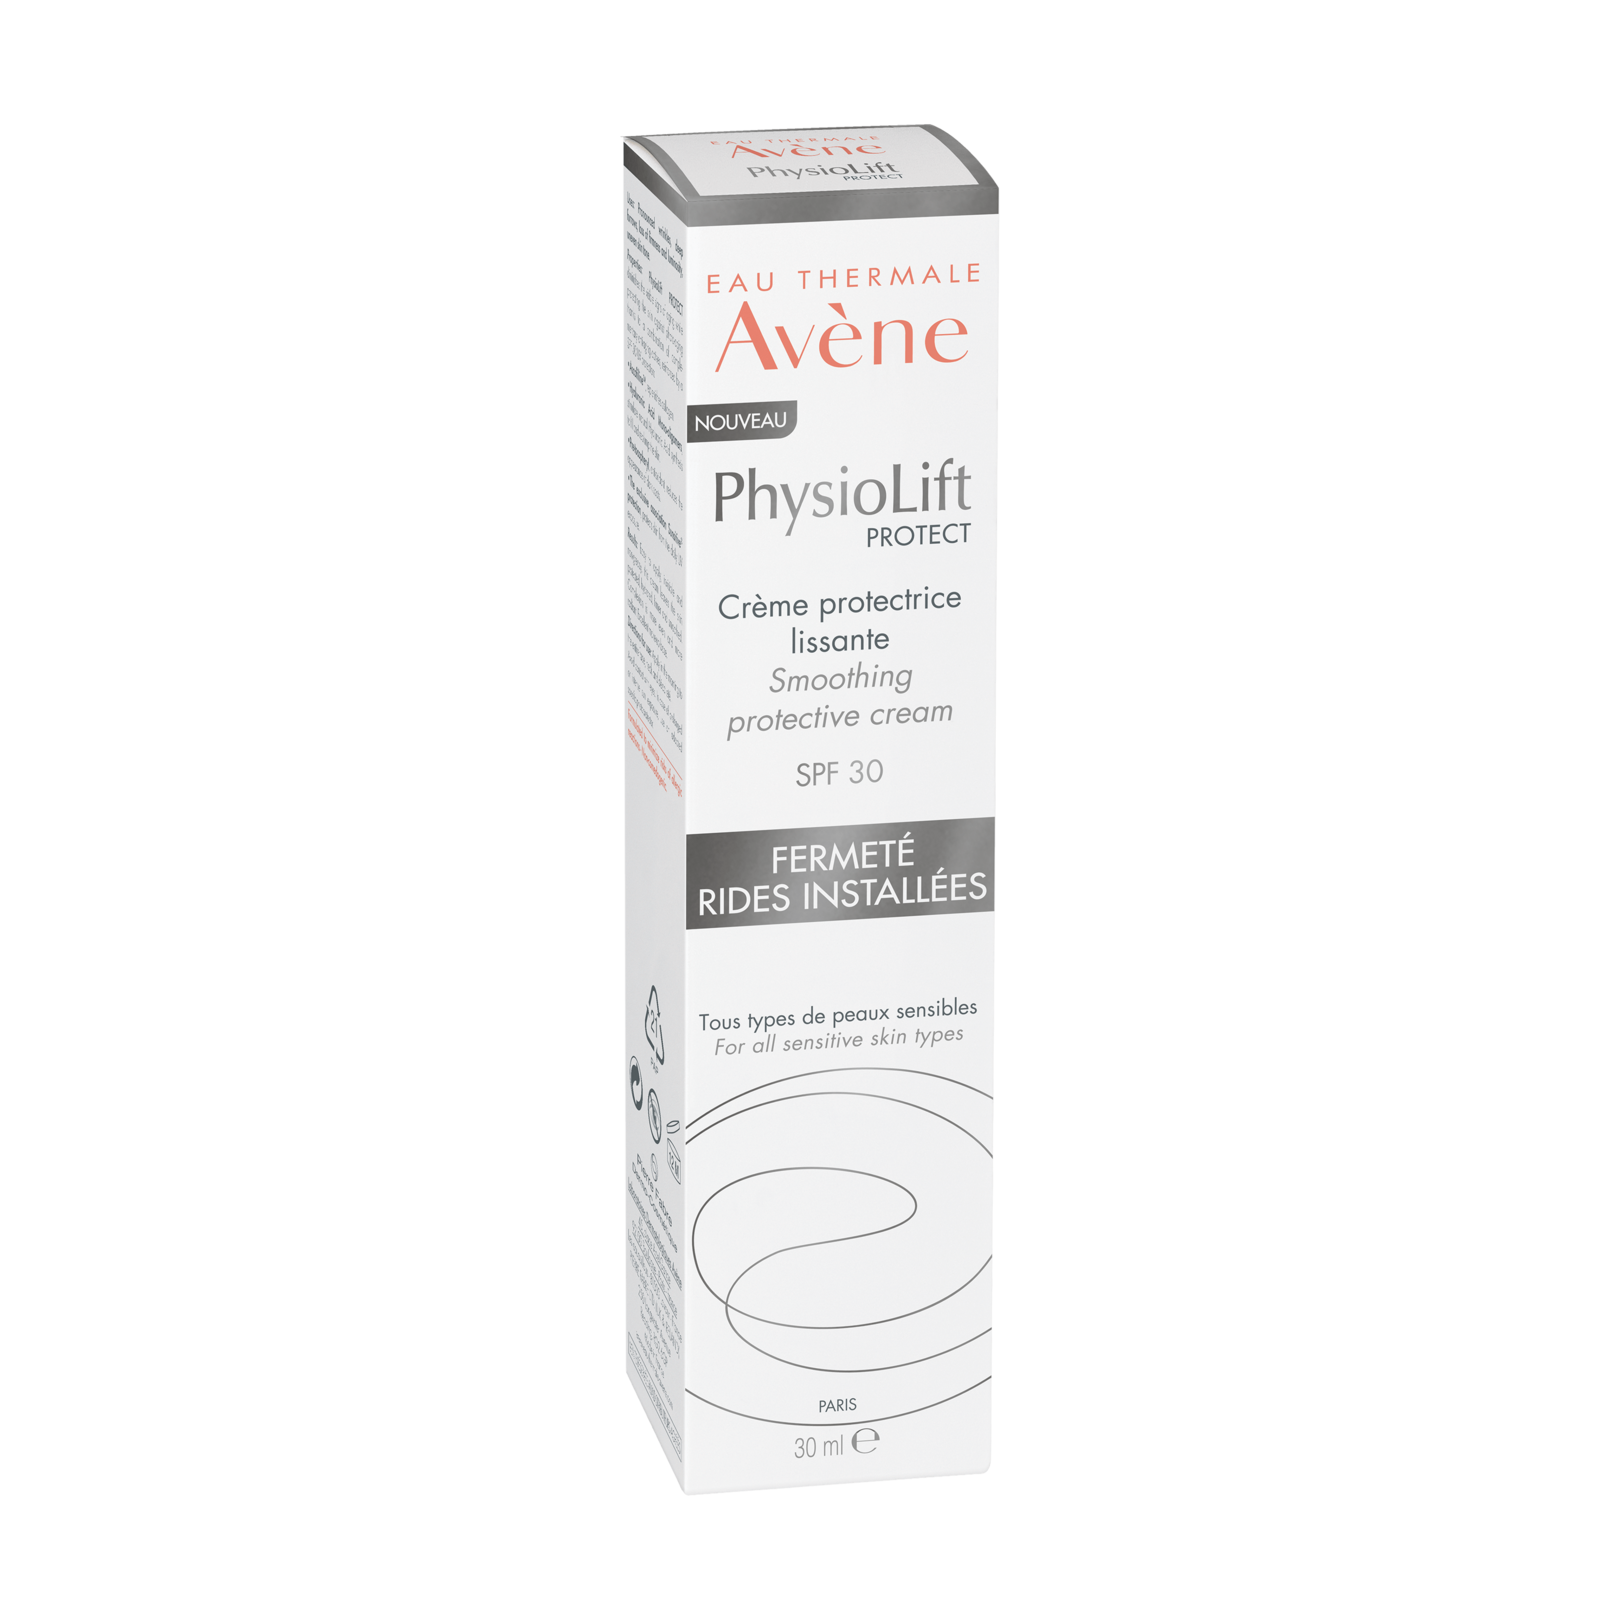 PhysioLift PROTECT Smoothing Protective Cream SPF 30